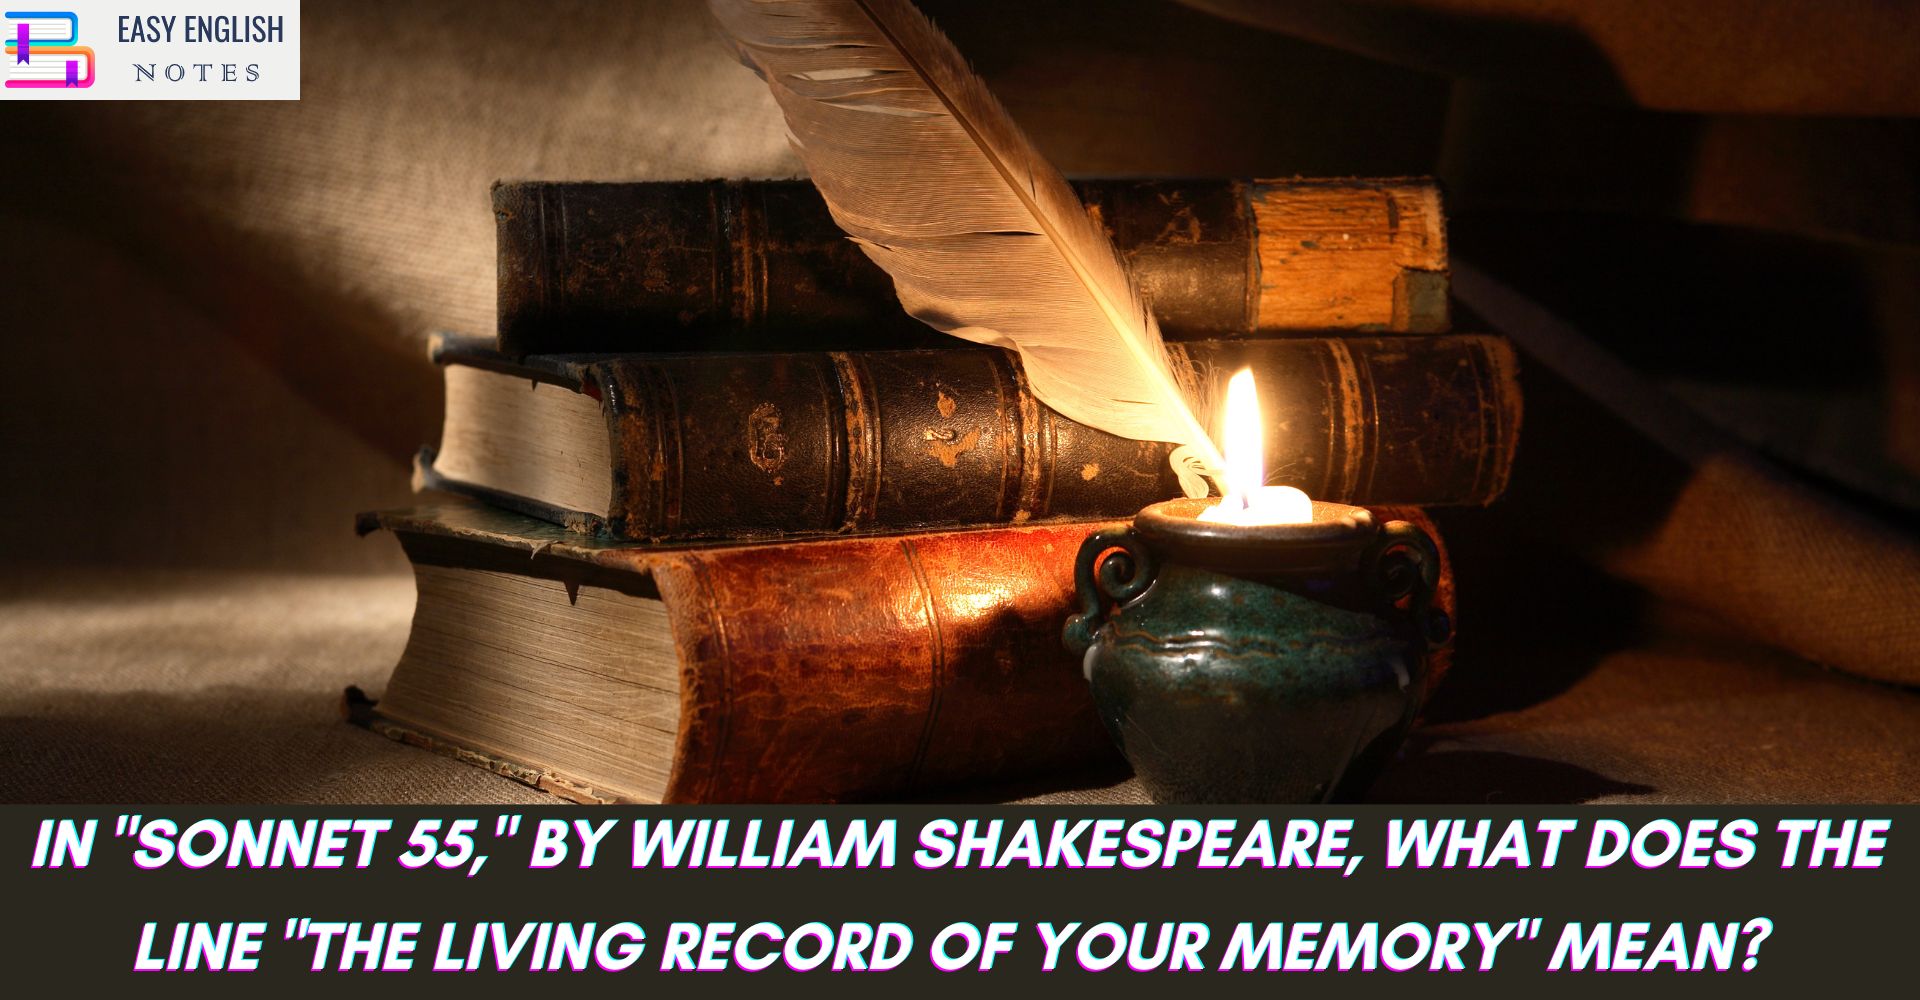 In the line "The living record of your memory" from "Sonnet 55," Shakespeare is referring to his own poem as a living testament or enduring documentation of the beloved's memory. He suggests that his verse will serve as a